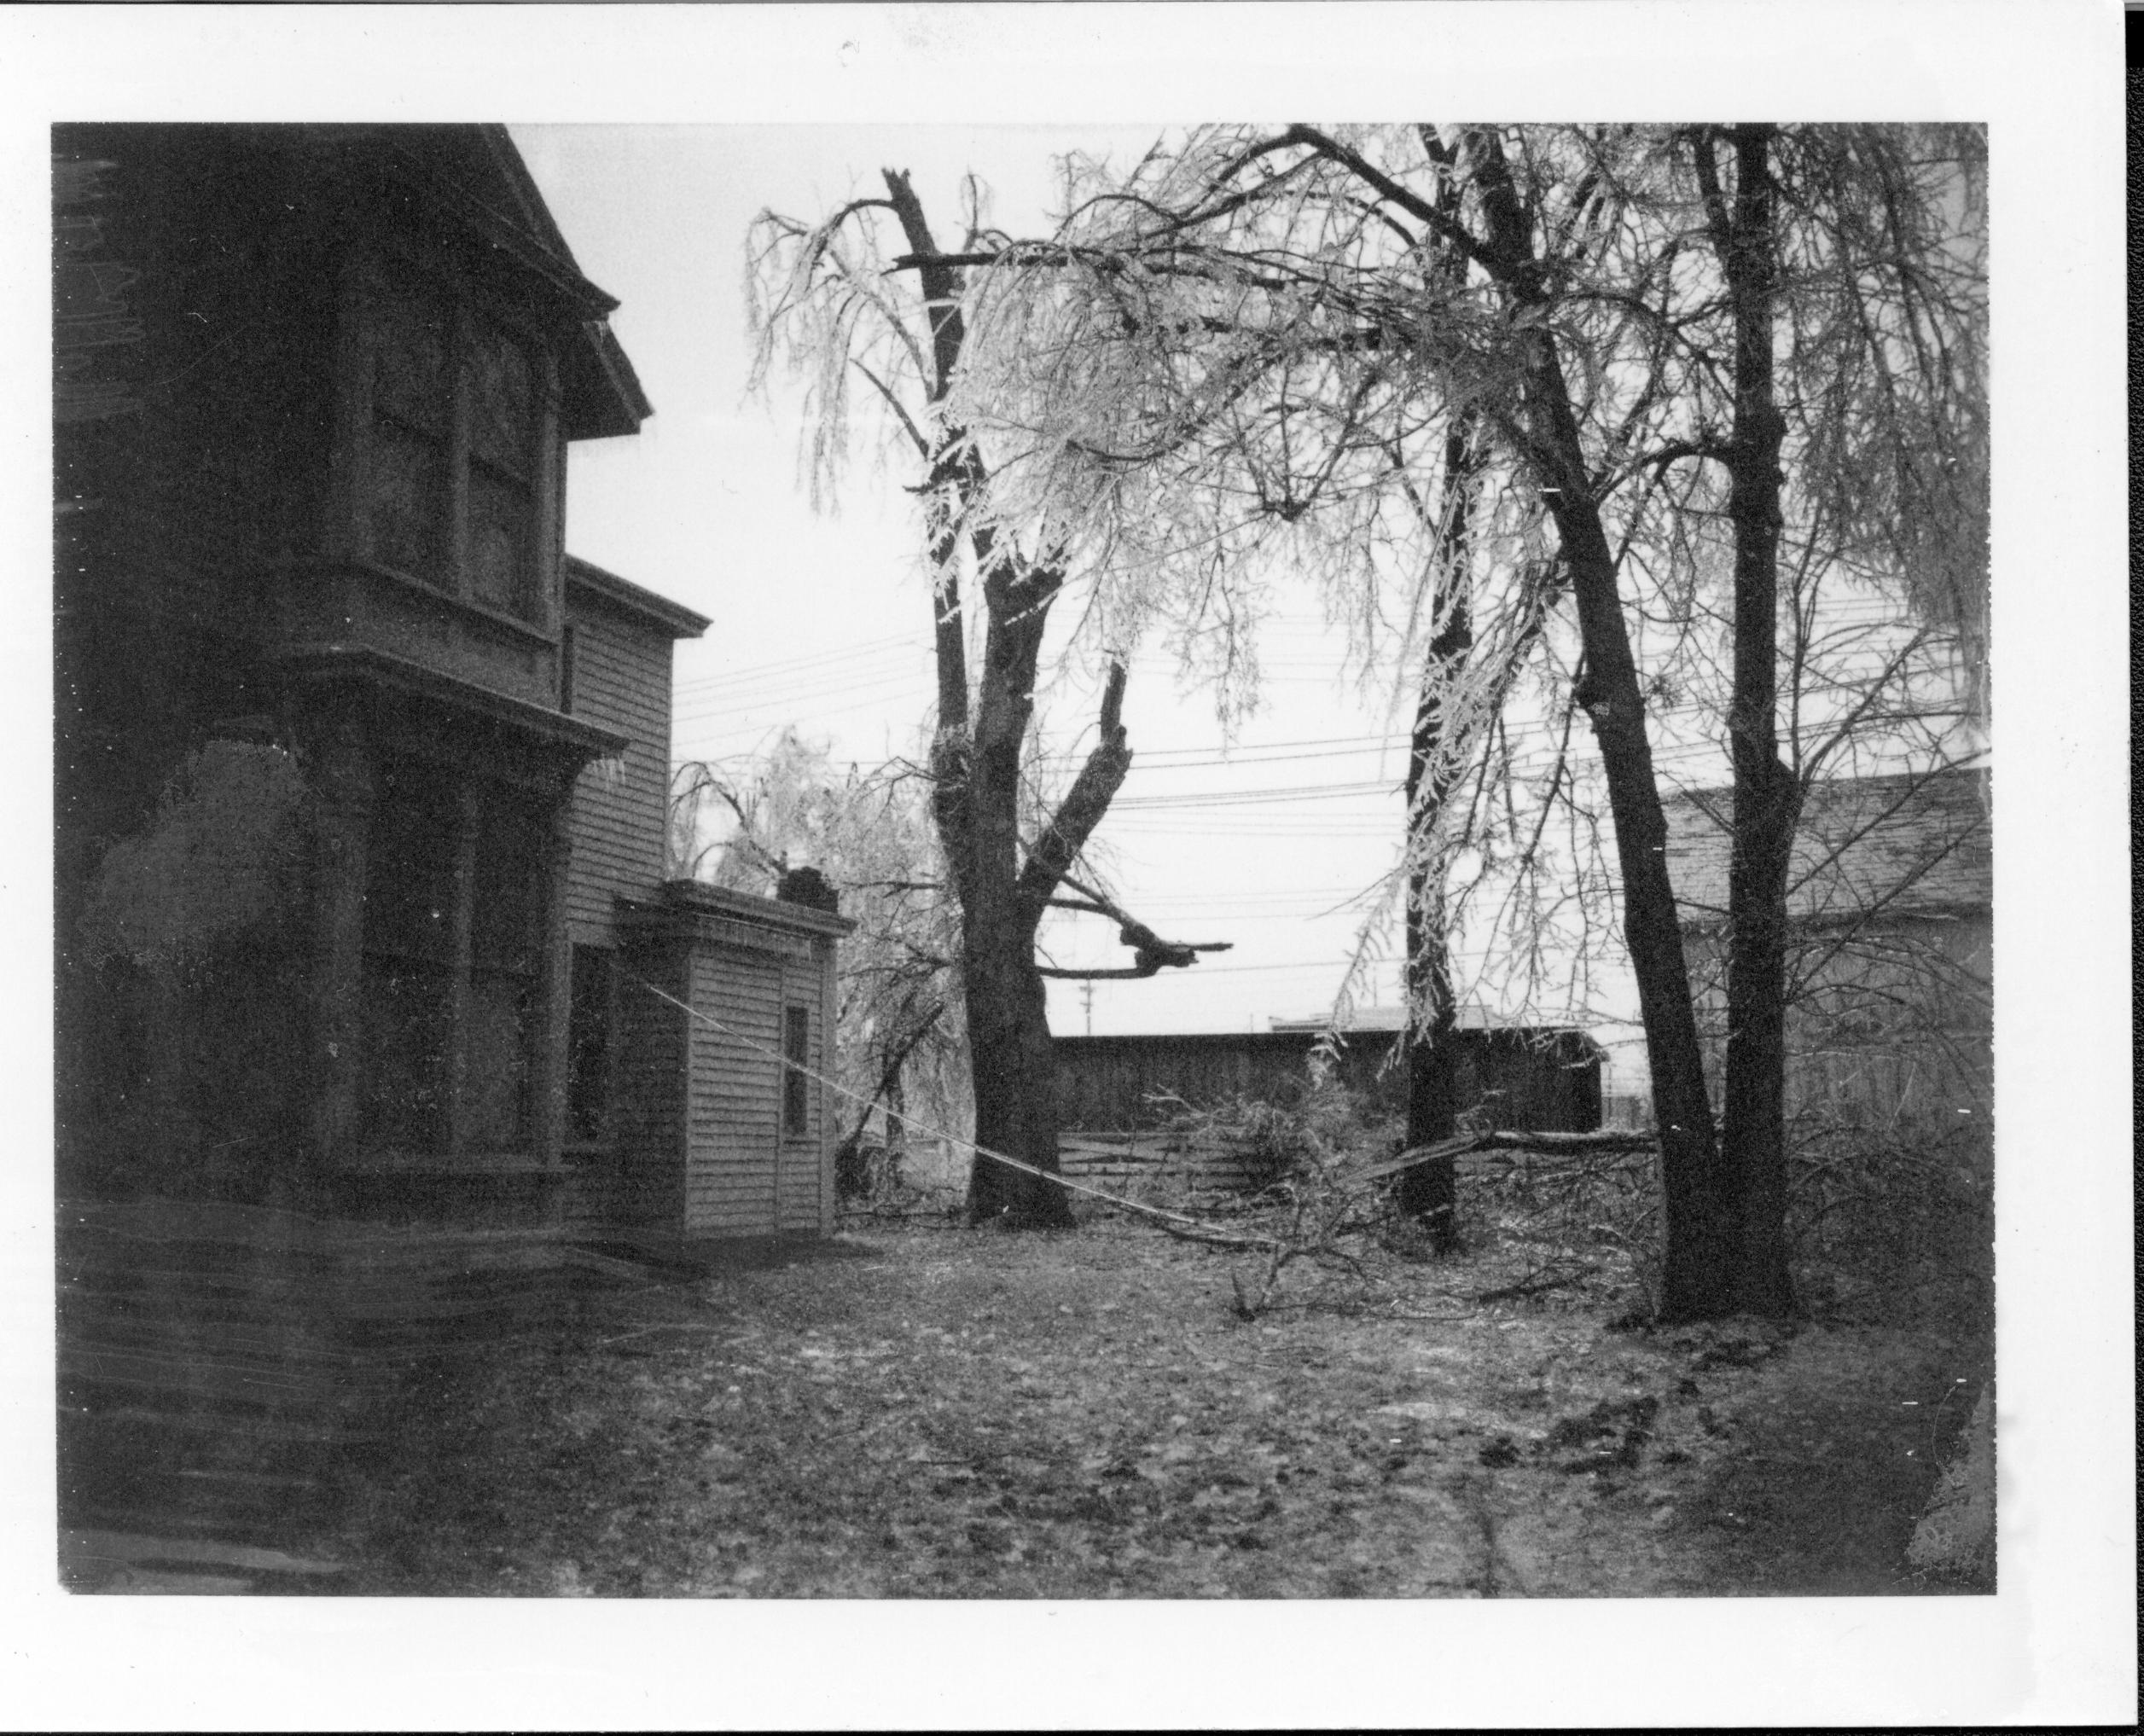 Ice Storm - South side of Robinson House, Allen barn on right, storage shed in center Looking East Robinson, Allen Barn, Ice Storm